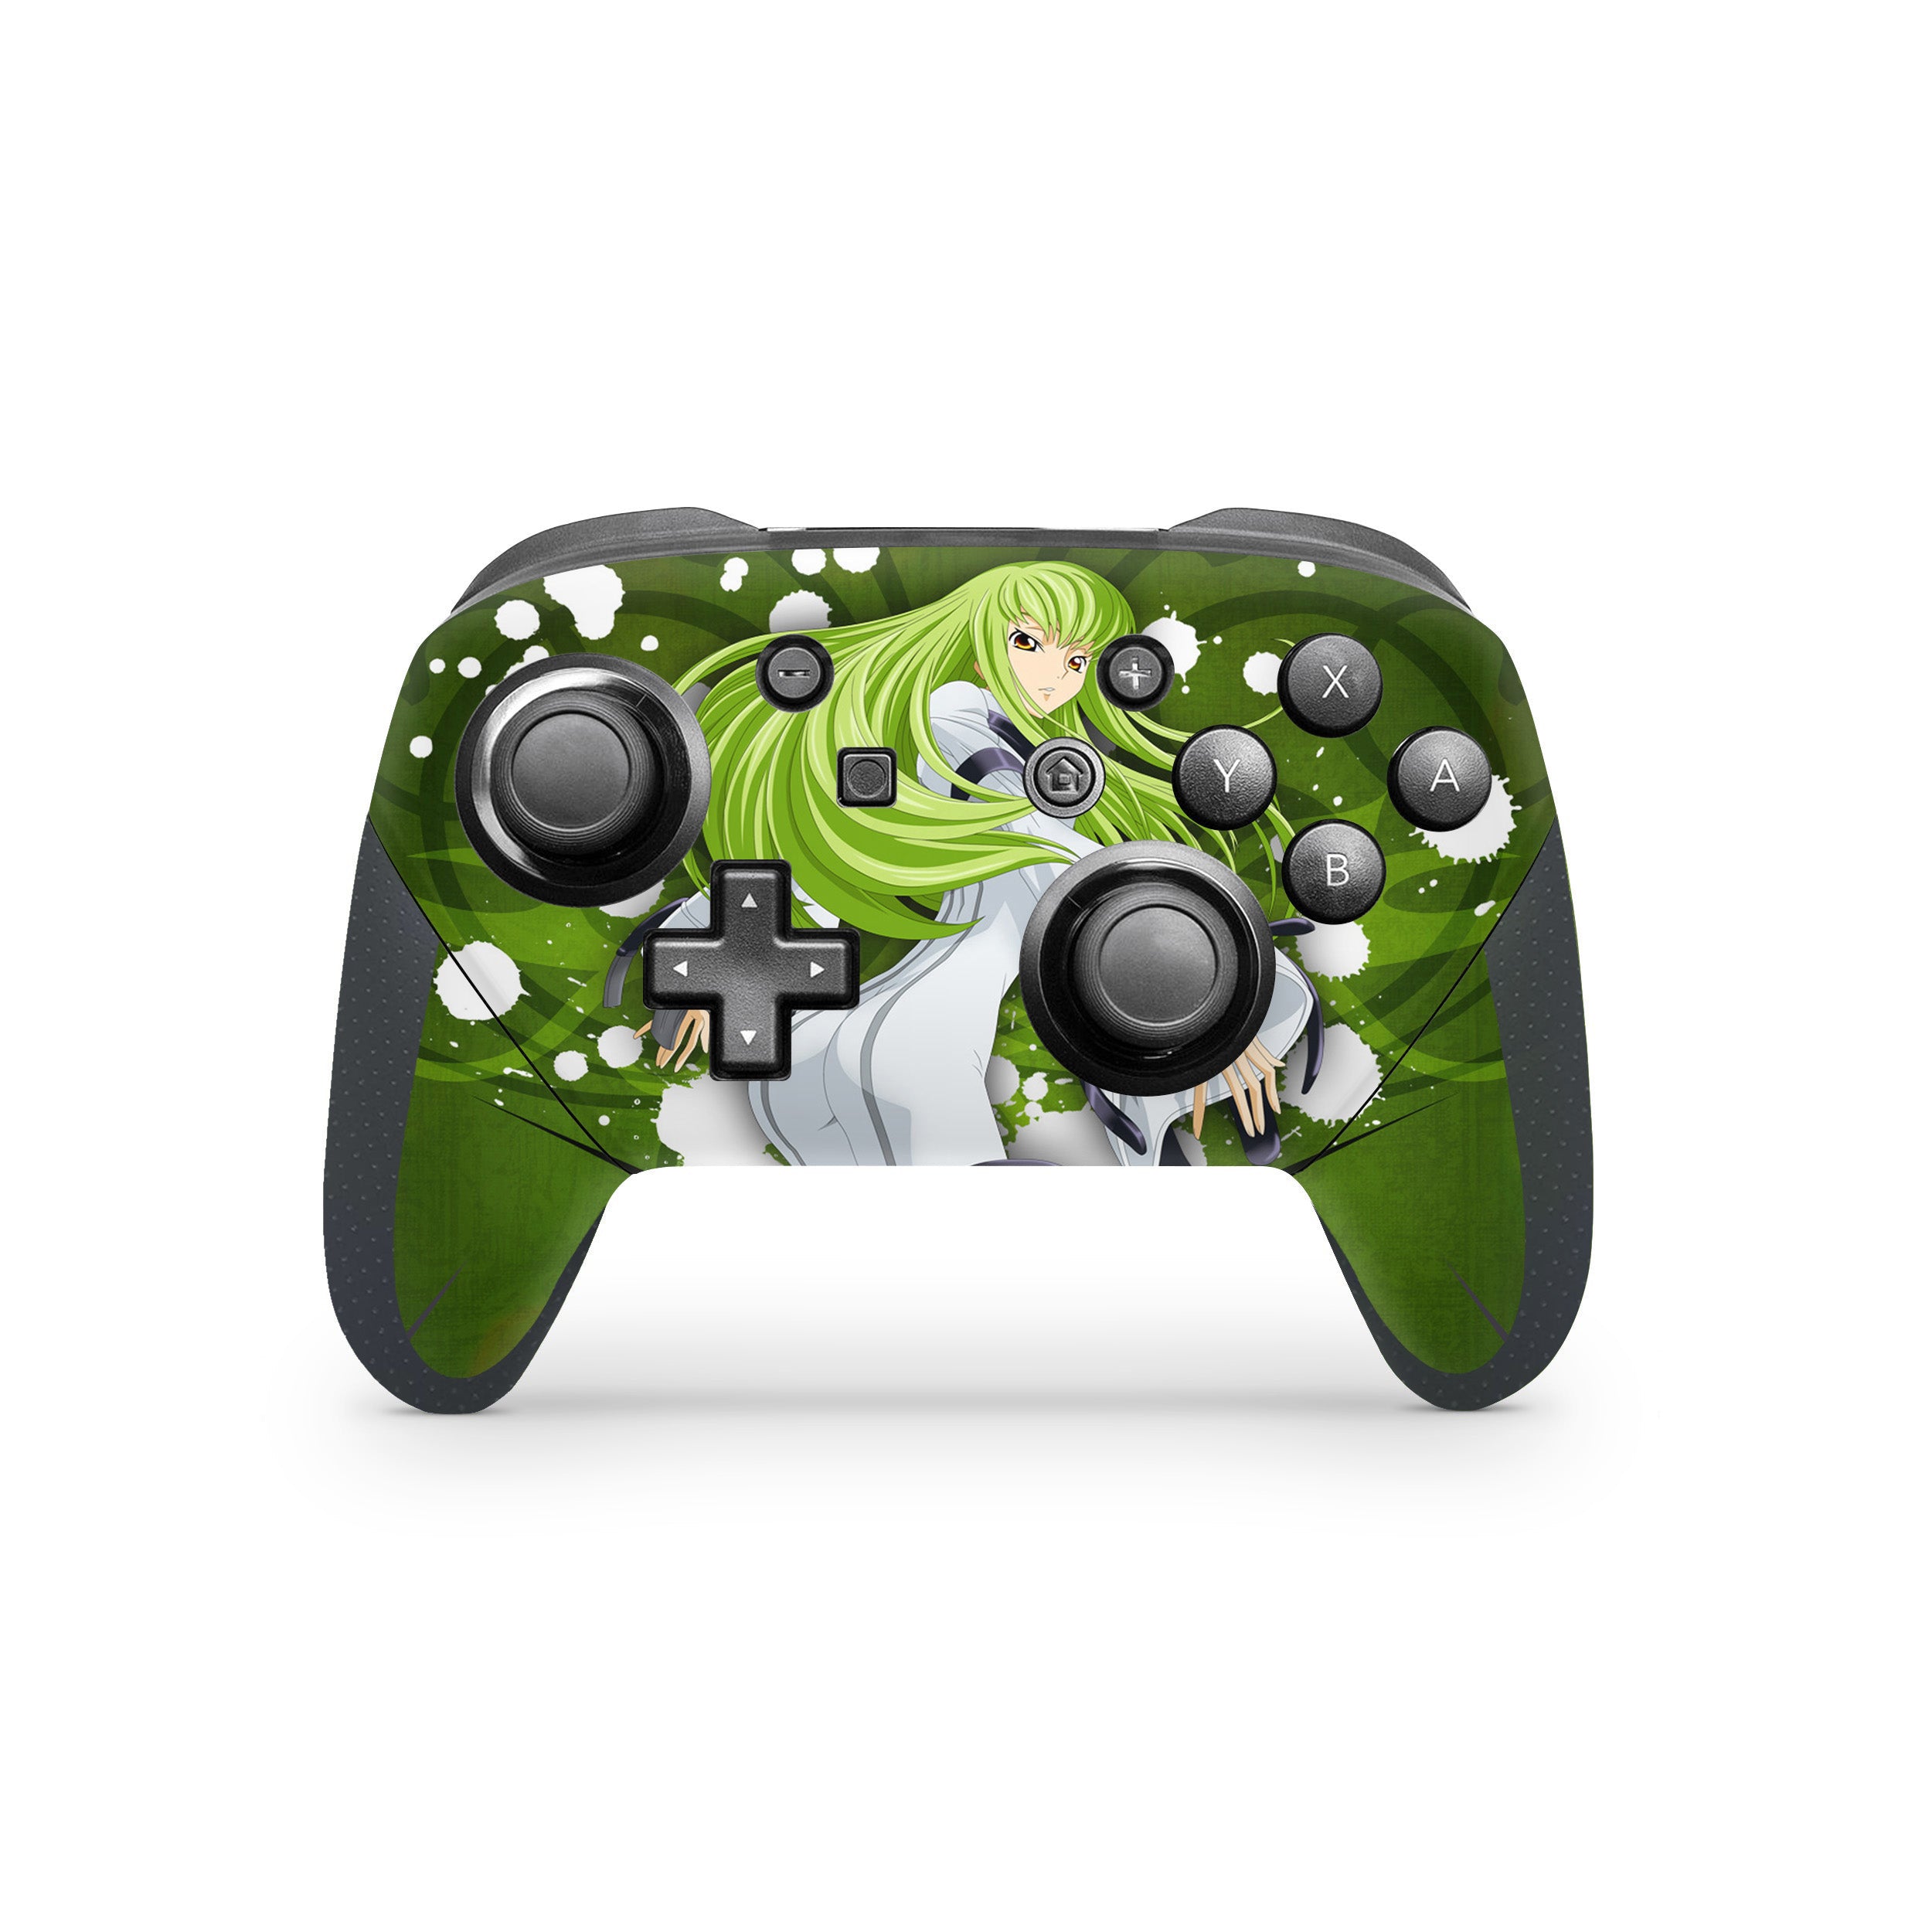 A video game skin featuring a Code Geass CC design for the Switch Pro Controller.